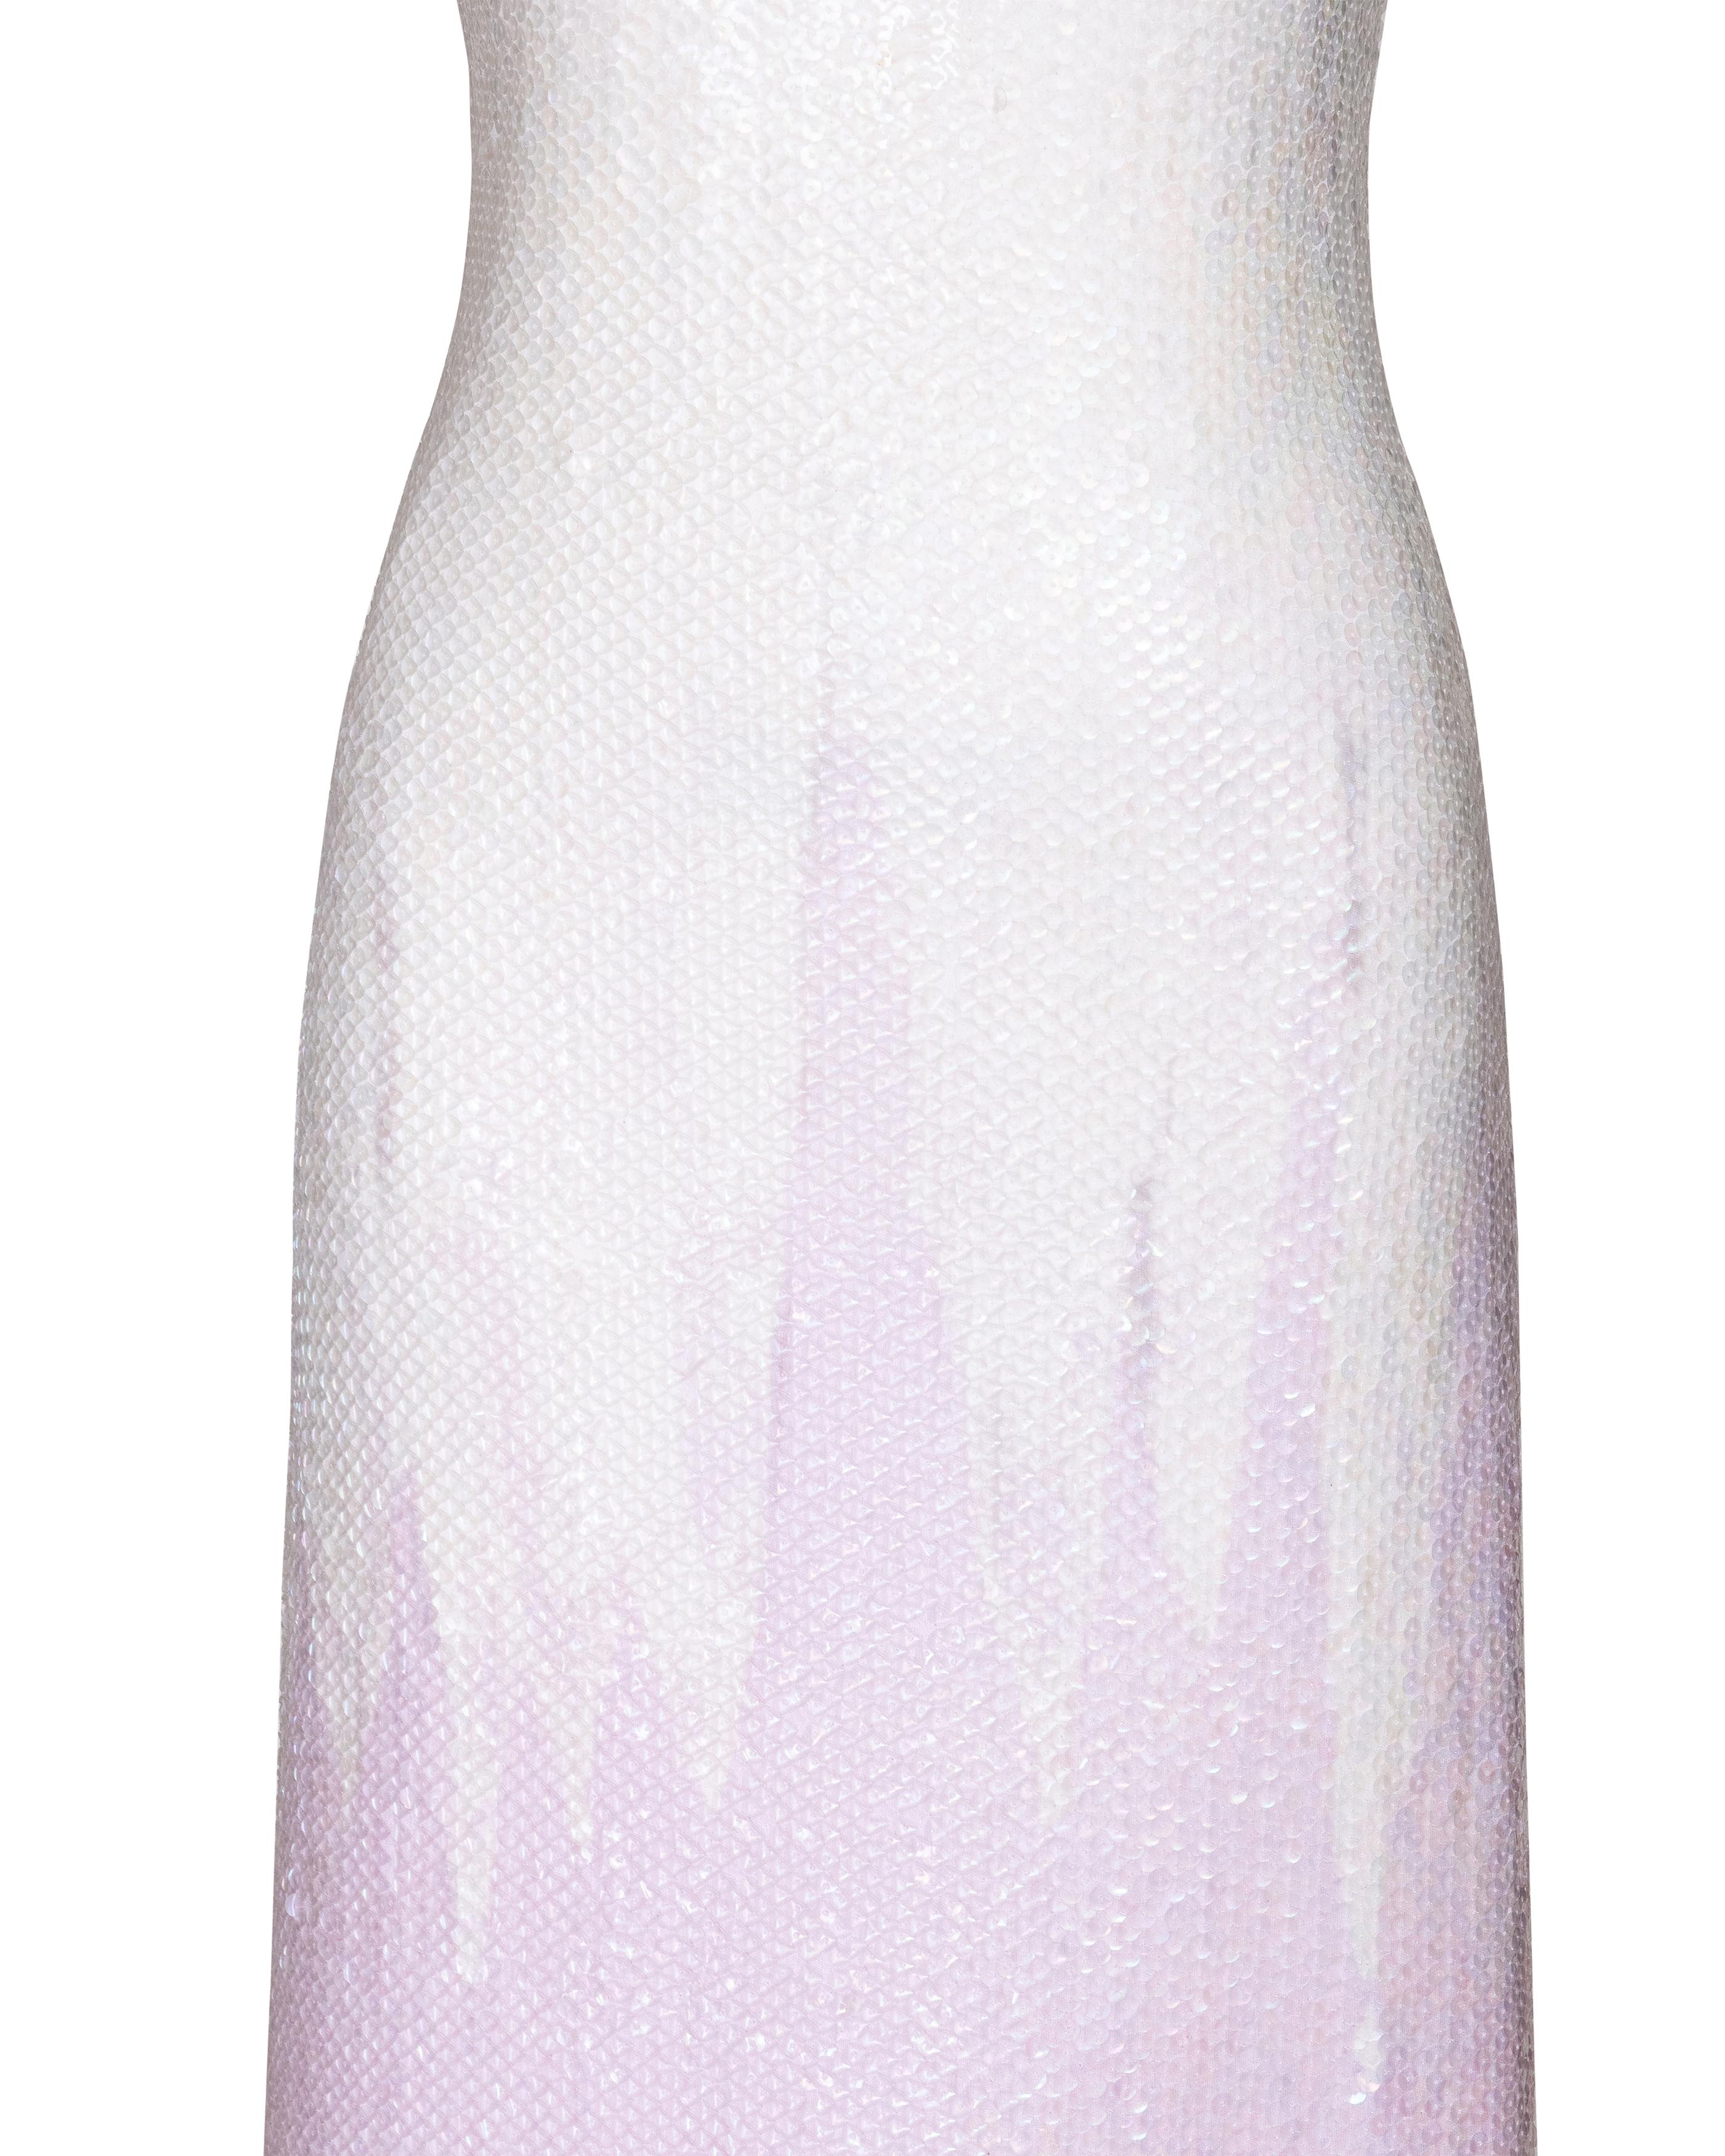 A/W 1973 Halston Sleeveless Geometric Point Sequin Gradient Gown For Sale 3